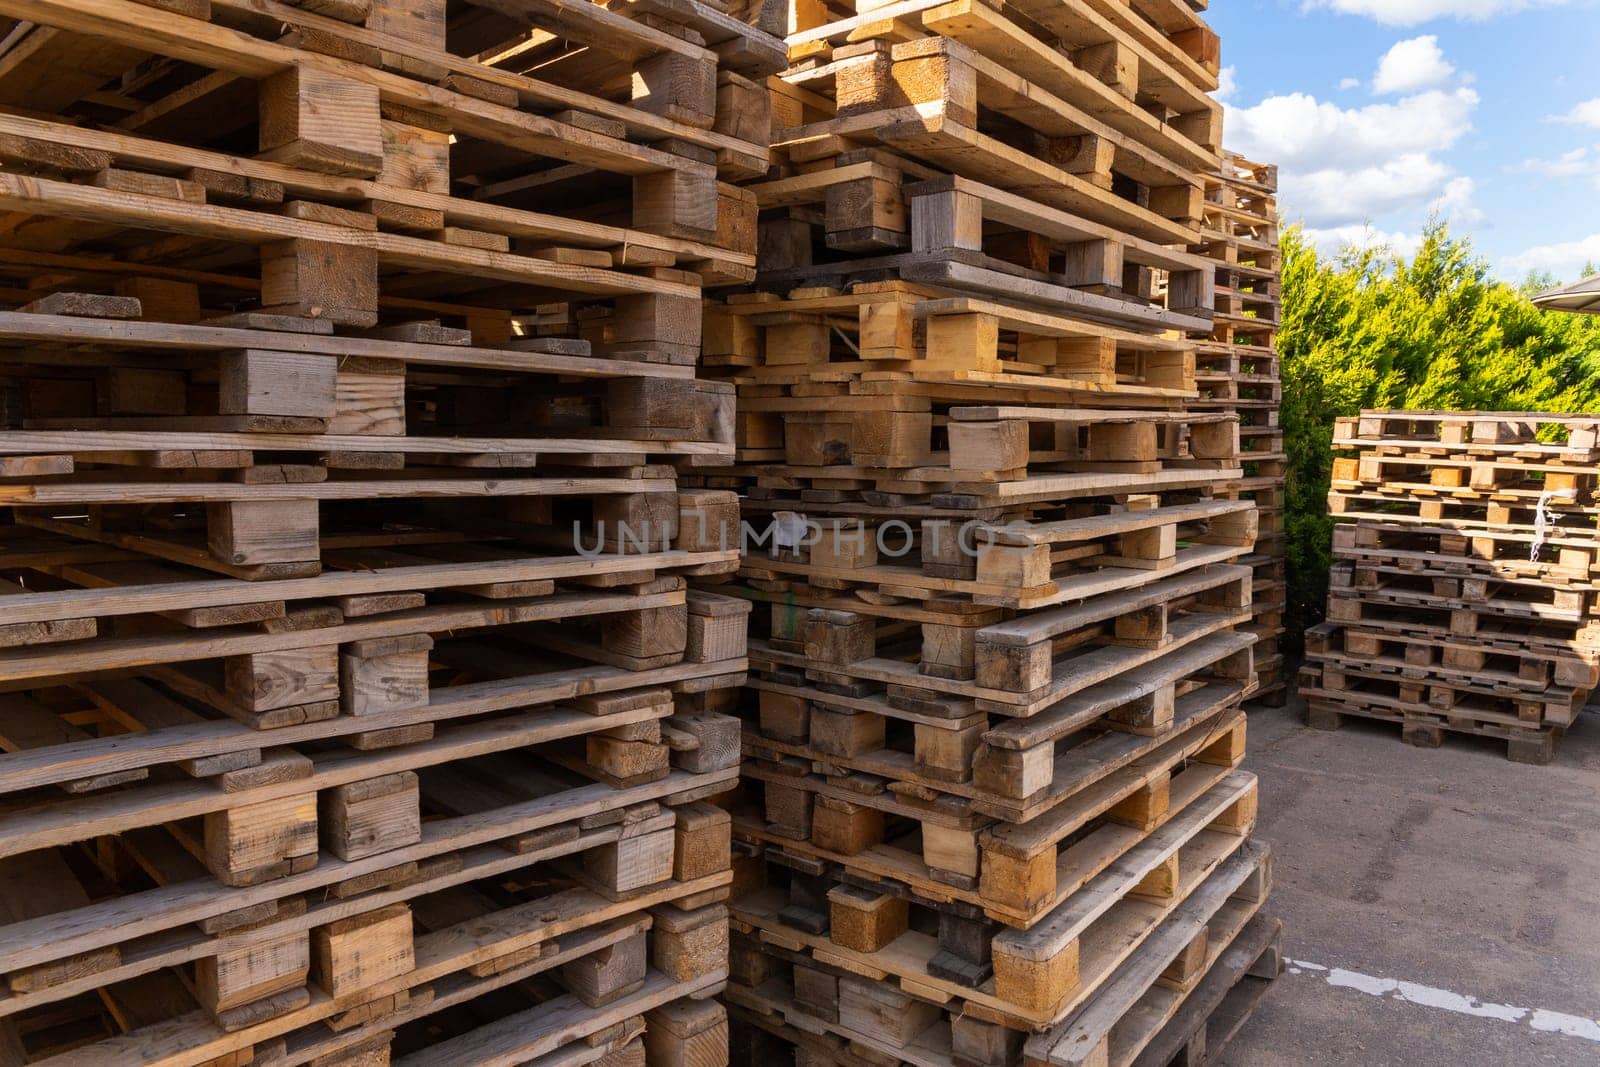 Piles of stacked natural wooden shipping pallets. Outside a big stack with big stack of wooden pallets.